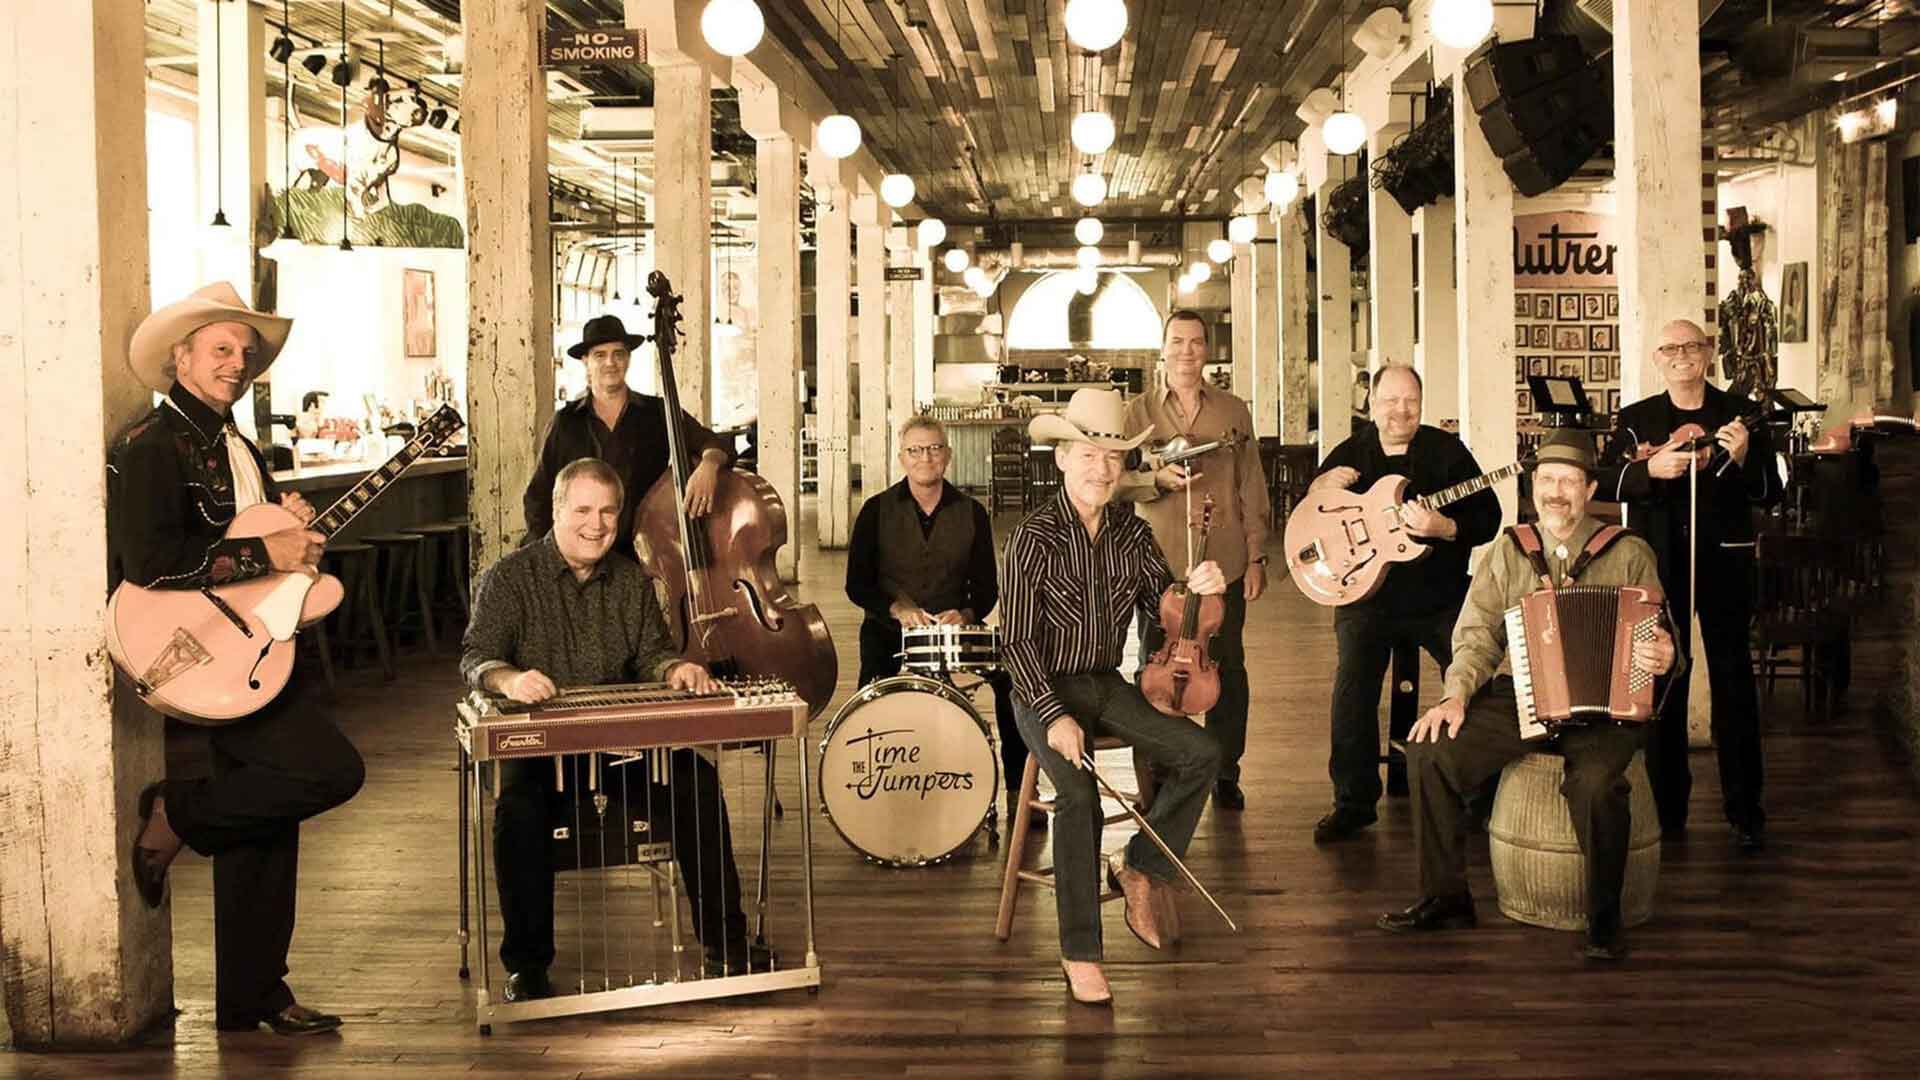 The Paramount Revival featuring Amy Grant and The Time Jumpers